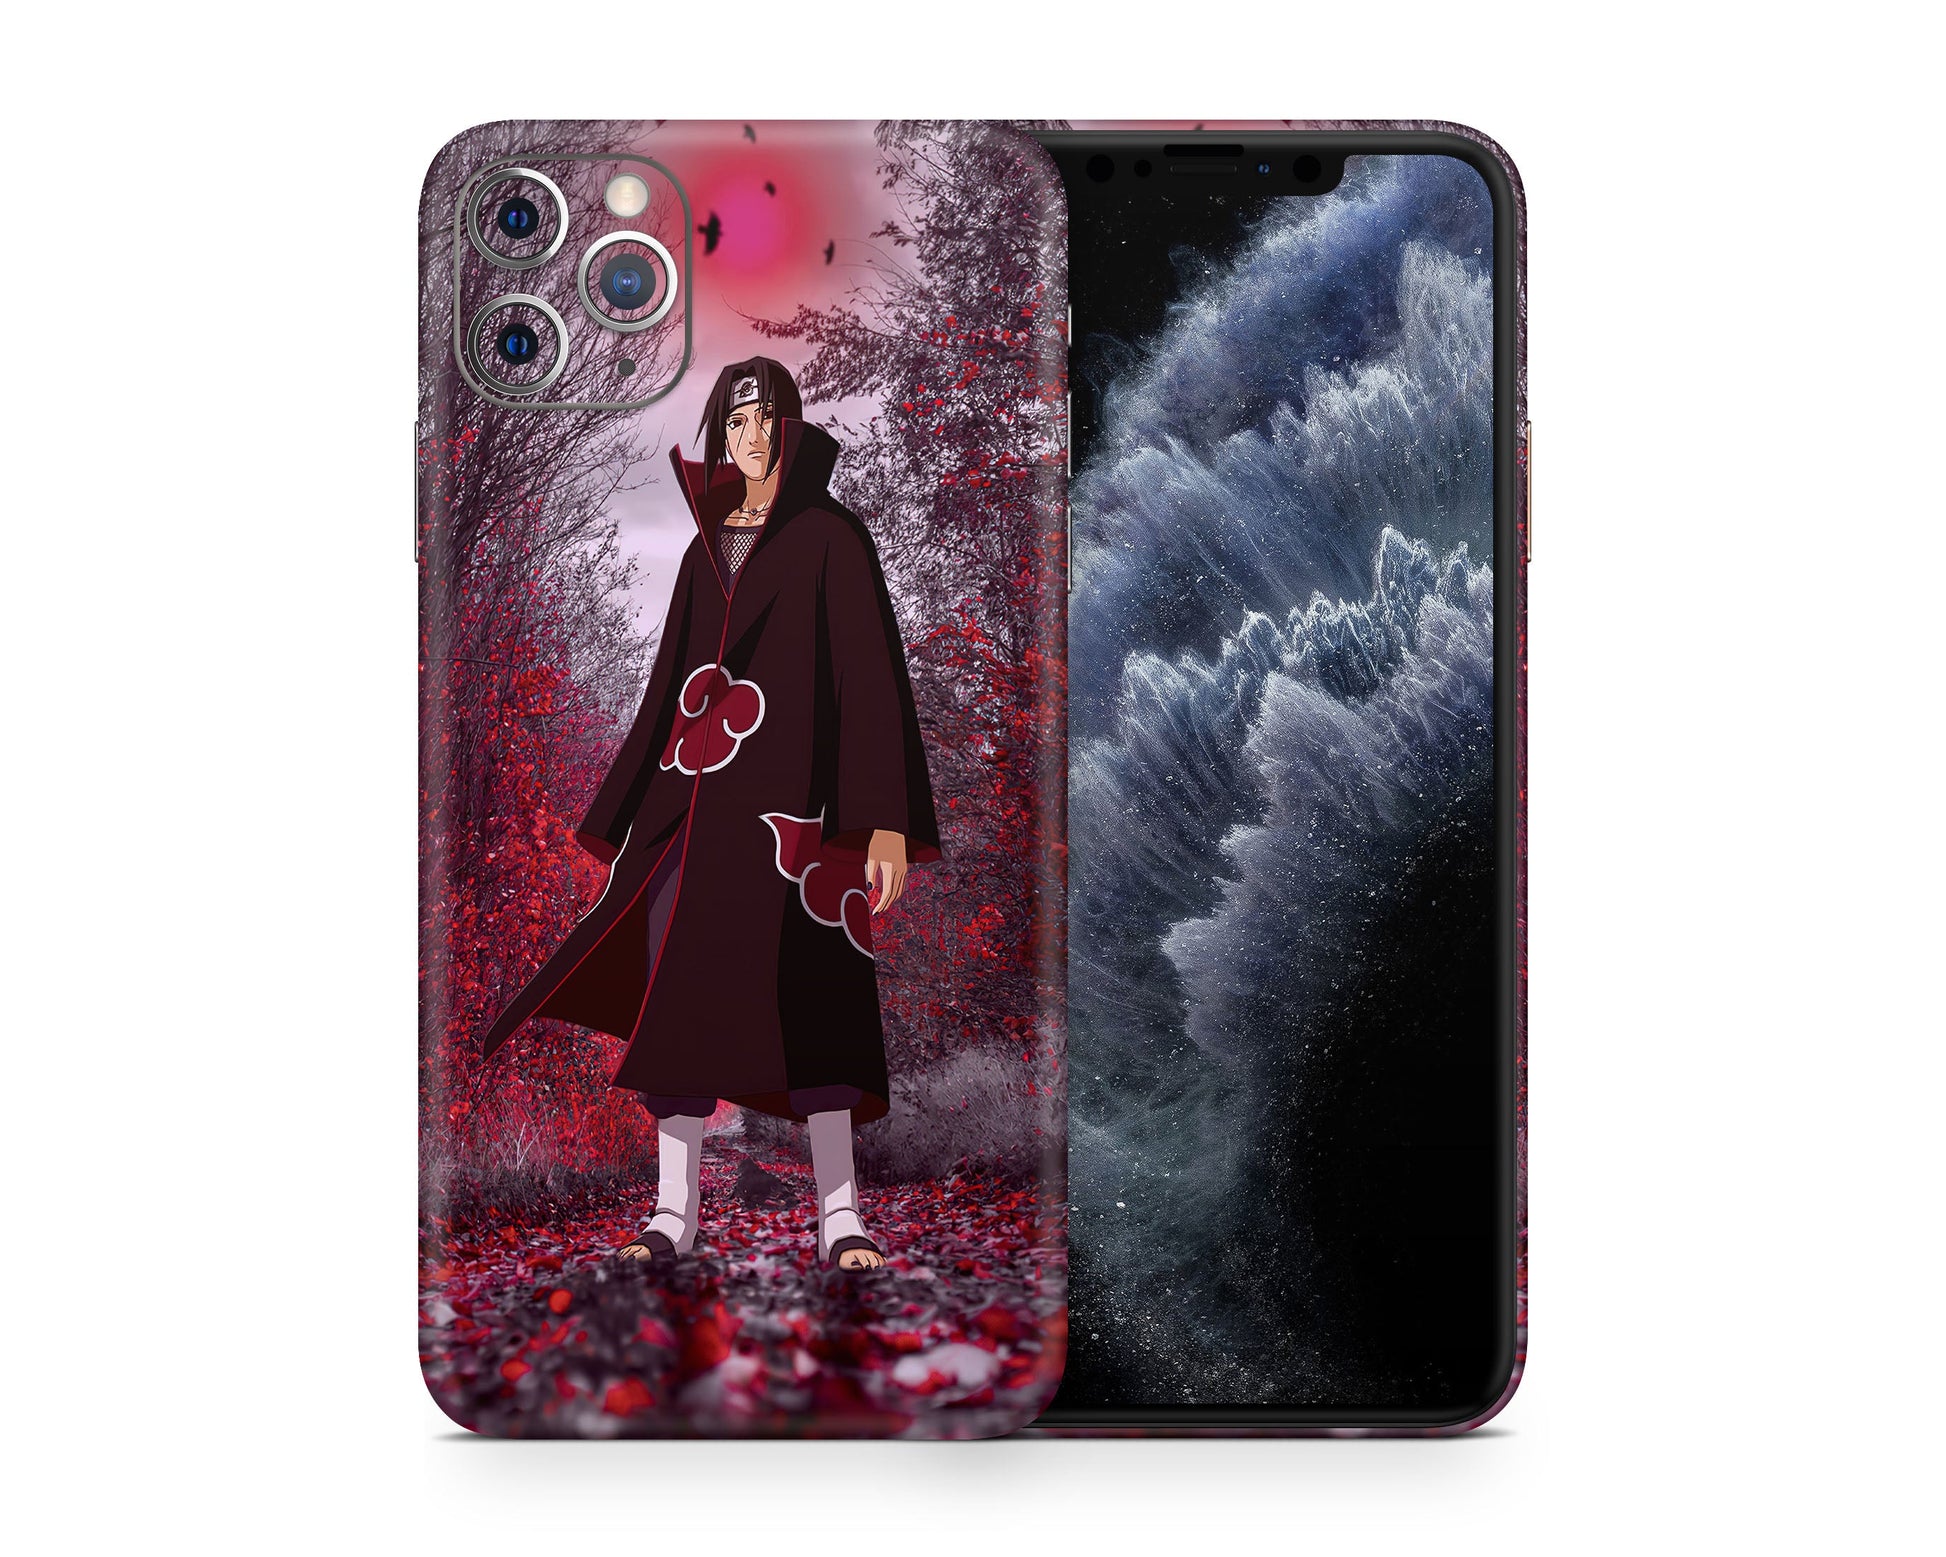 Anime Naruto Itachi Shock Proof Phone Case for IPhone 6 7 8 Plus